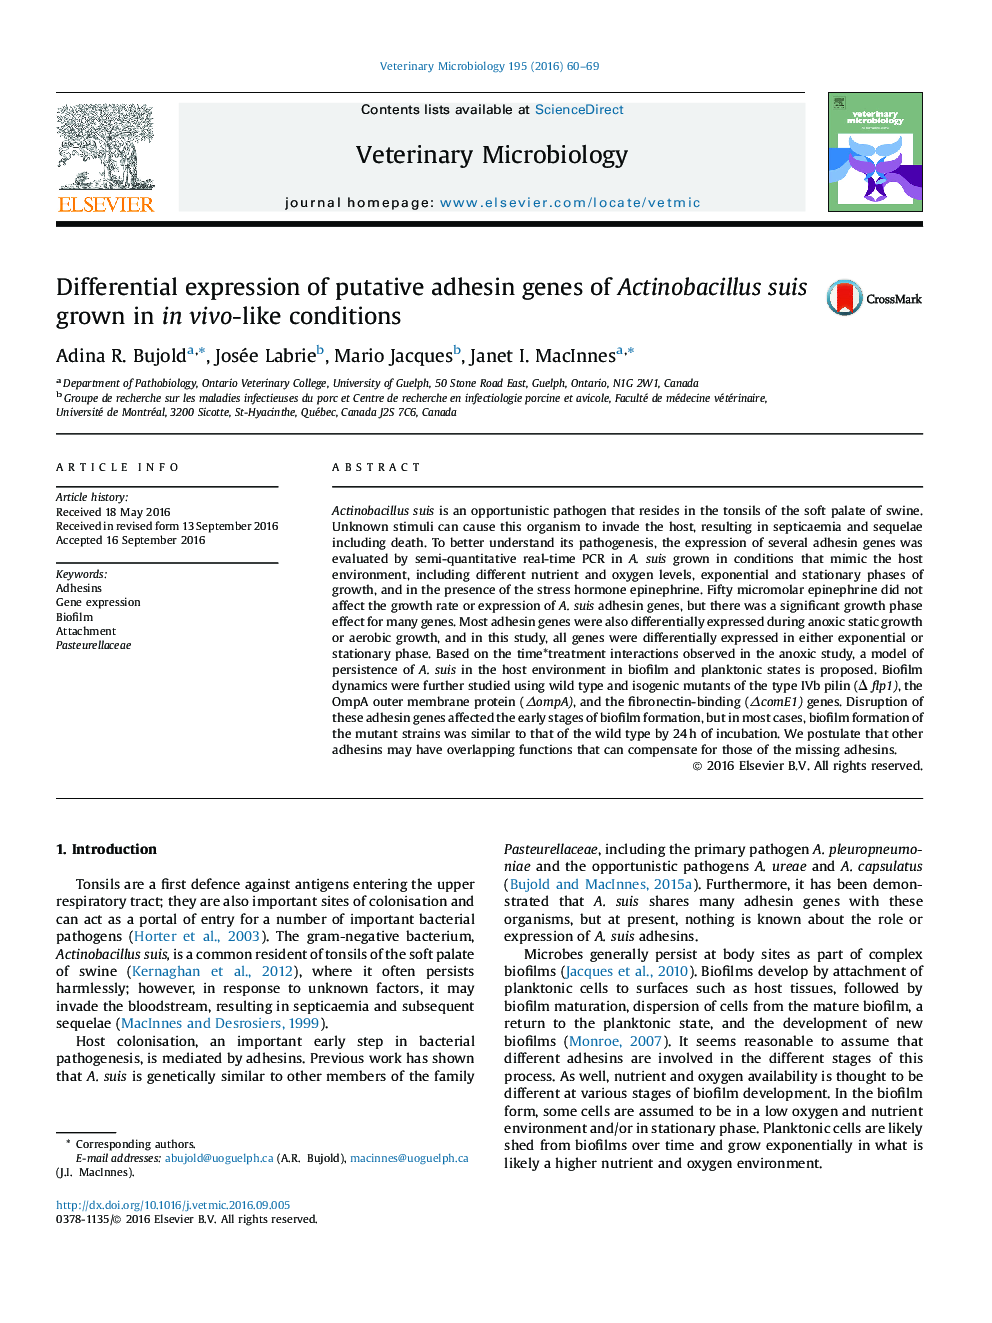 Differential expression of putative adhesin genes of Actinobacillus suis grown in in vivo-like conditions